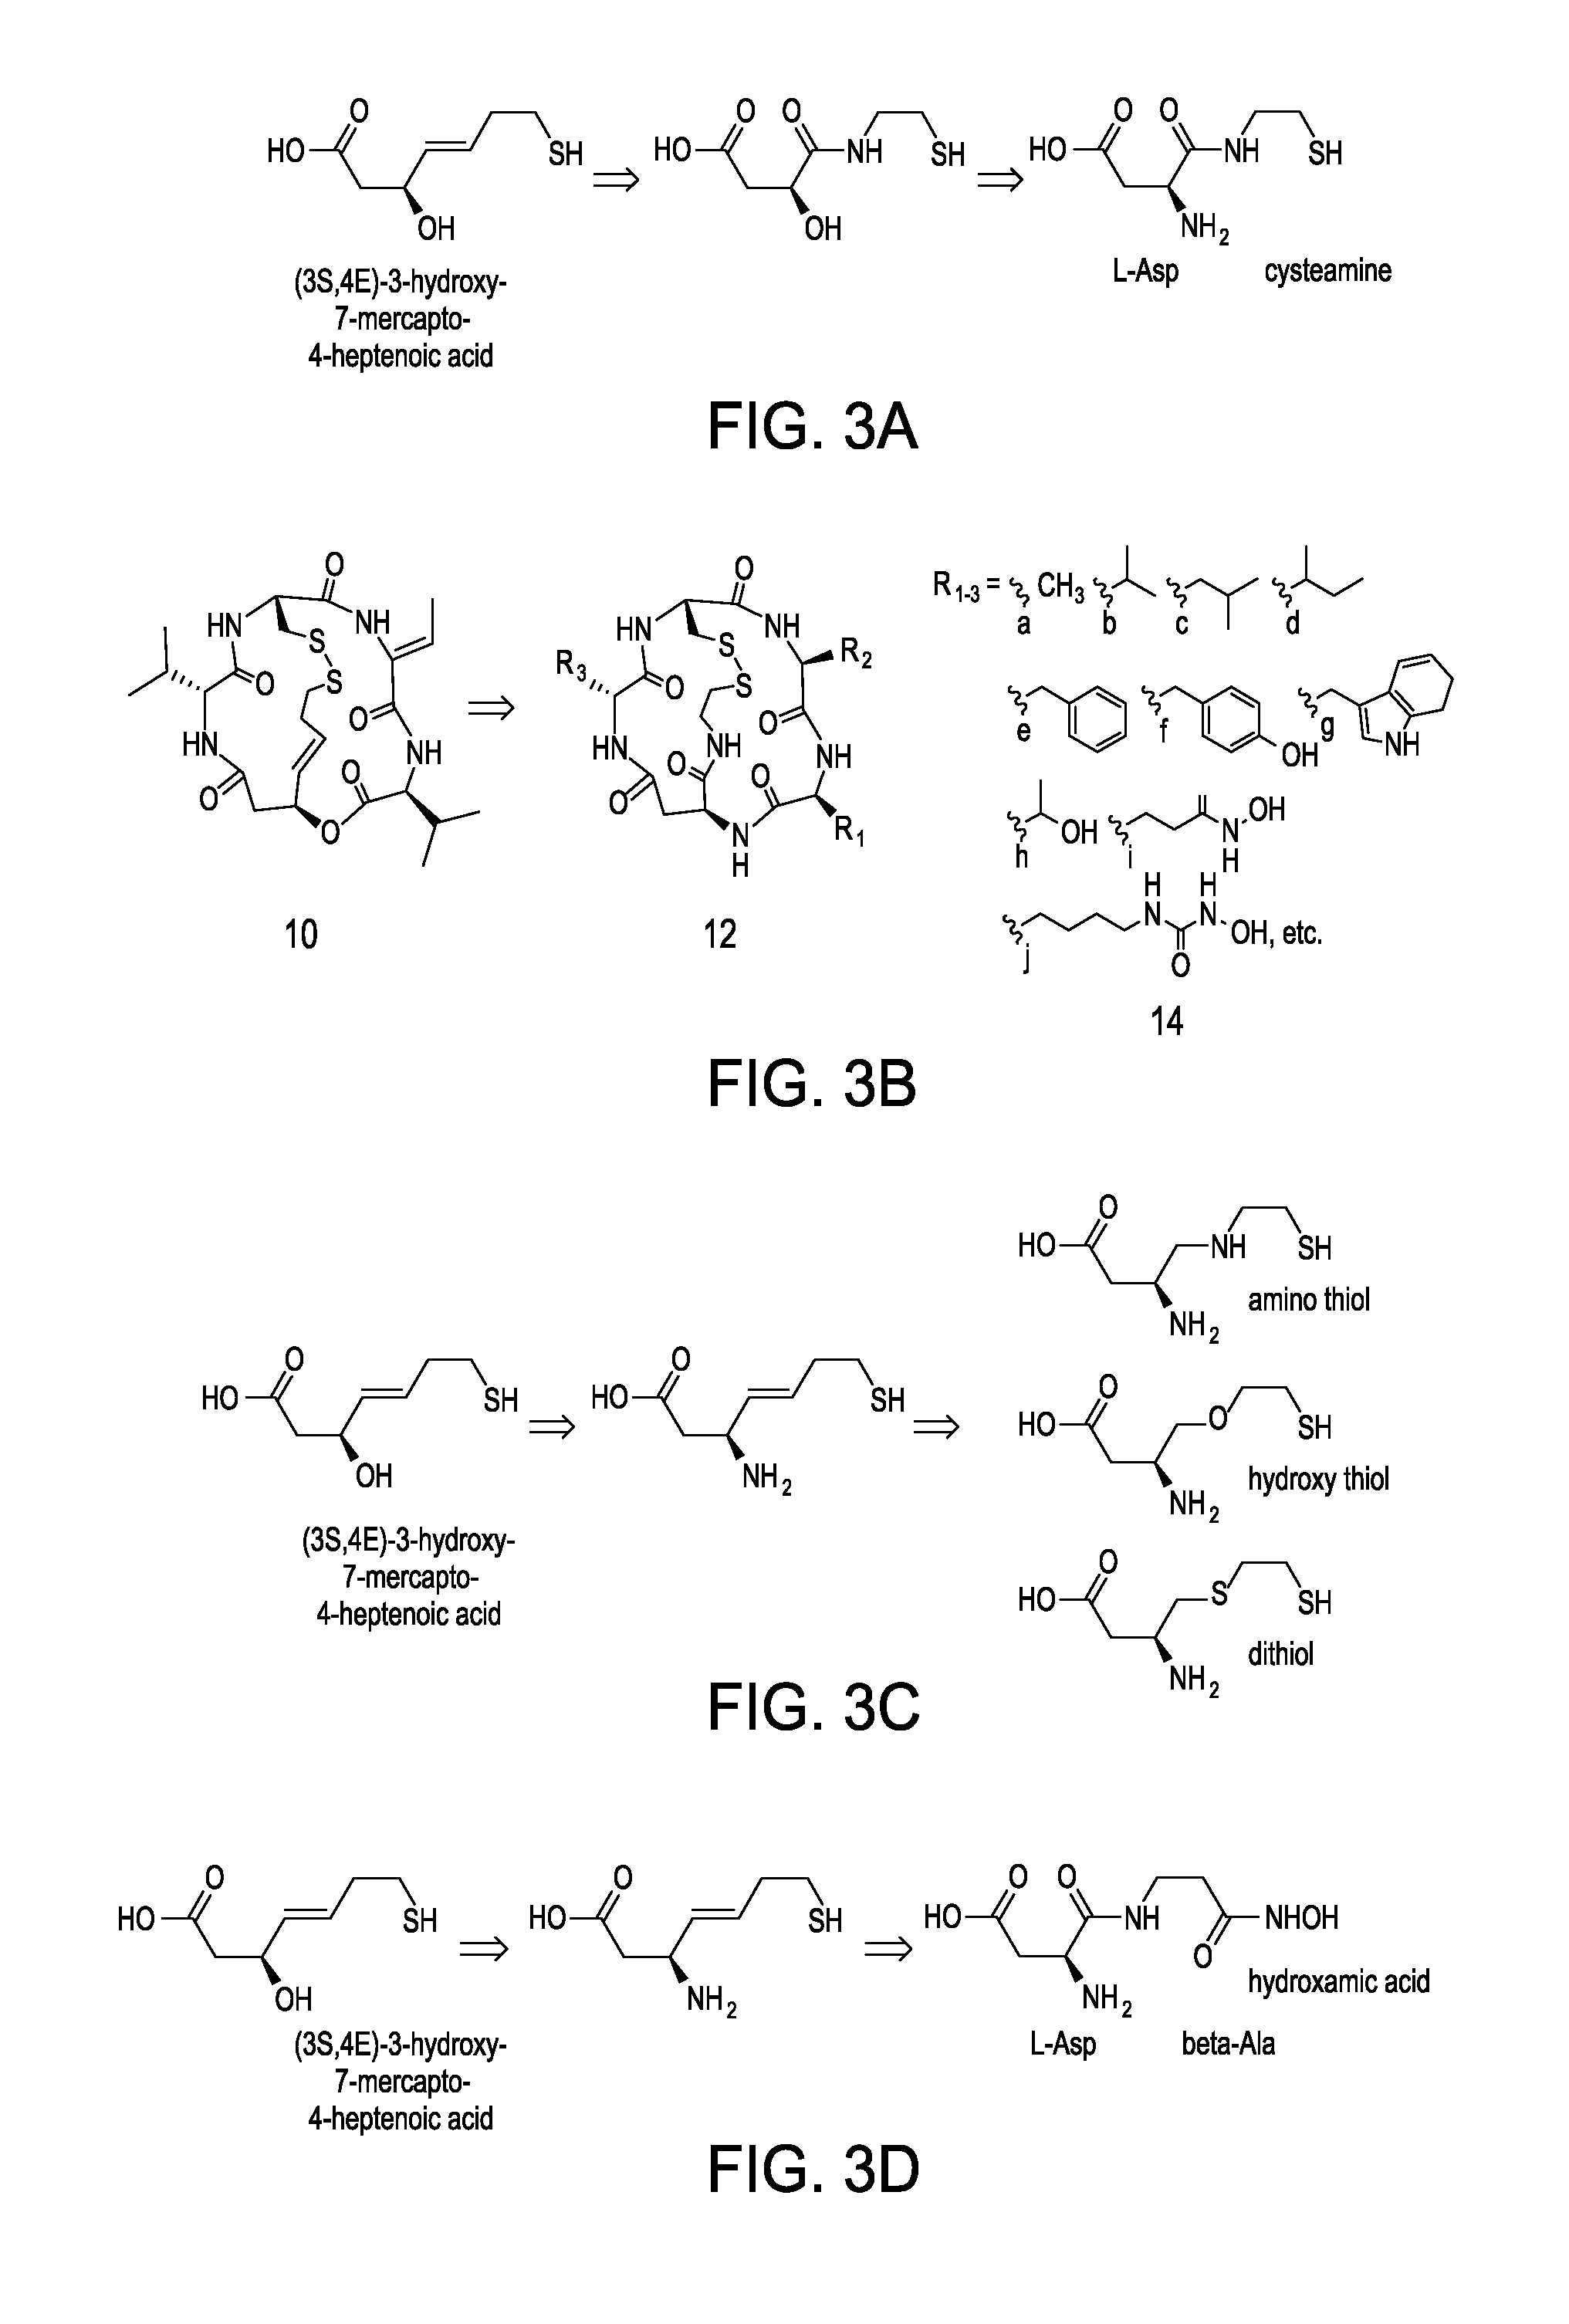 Composition and method for the treatment of diseases affected by histone deacetylase inhibitors